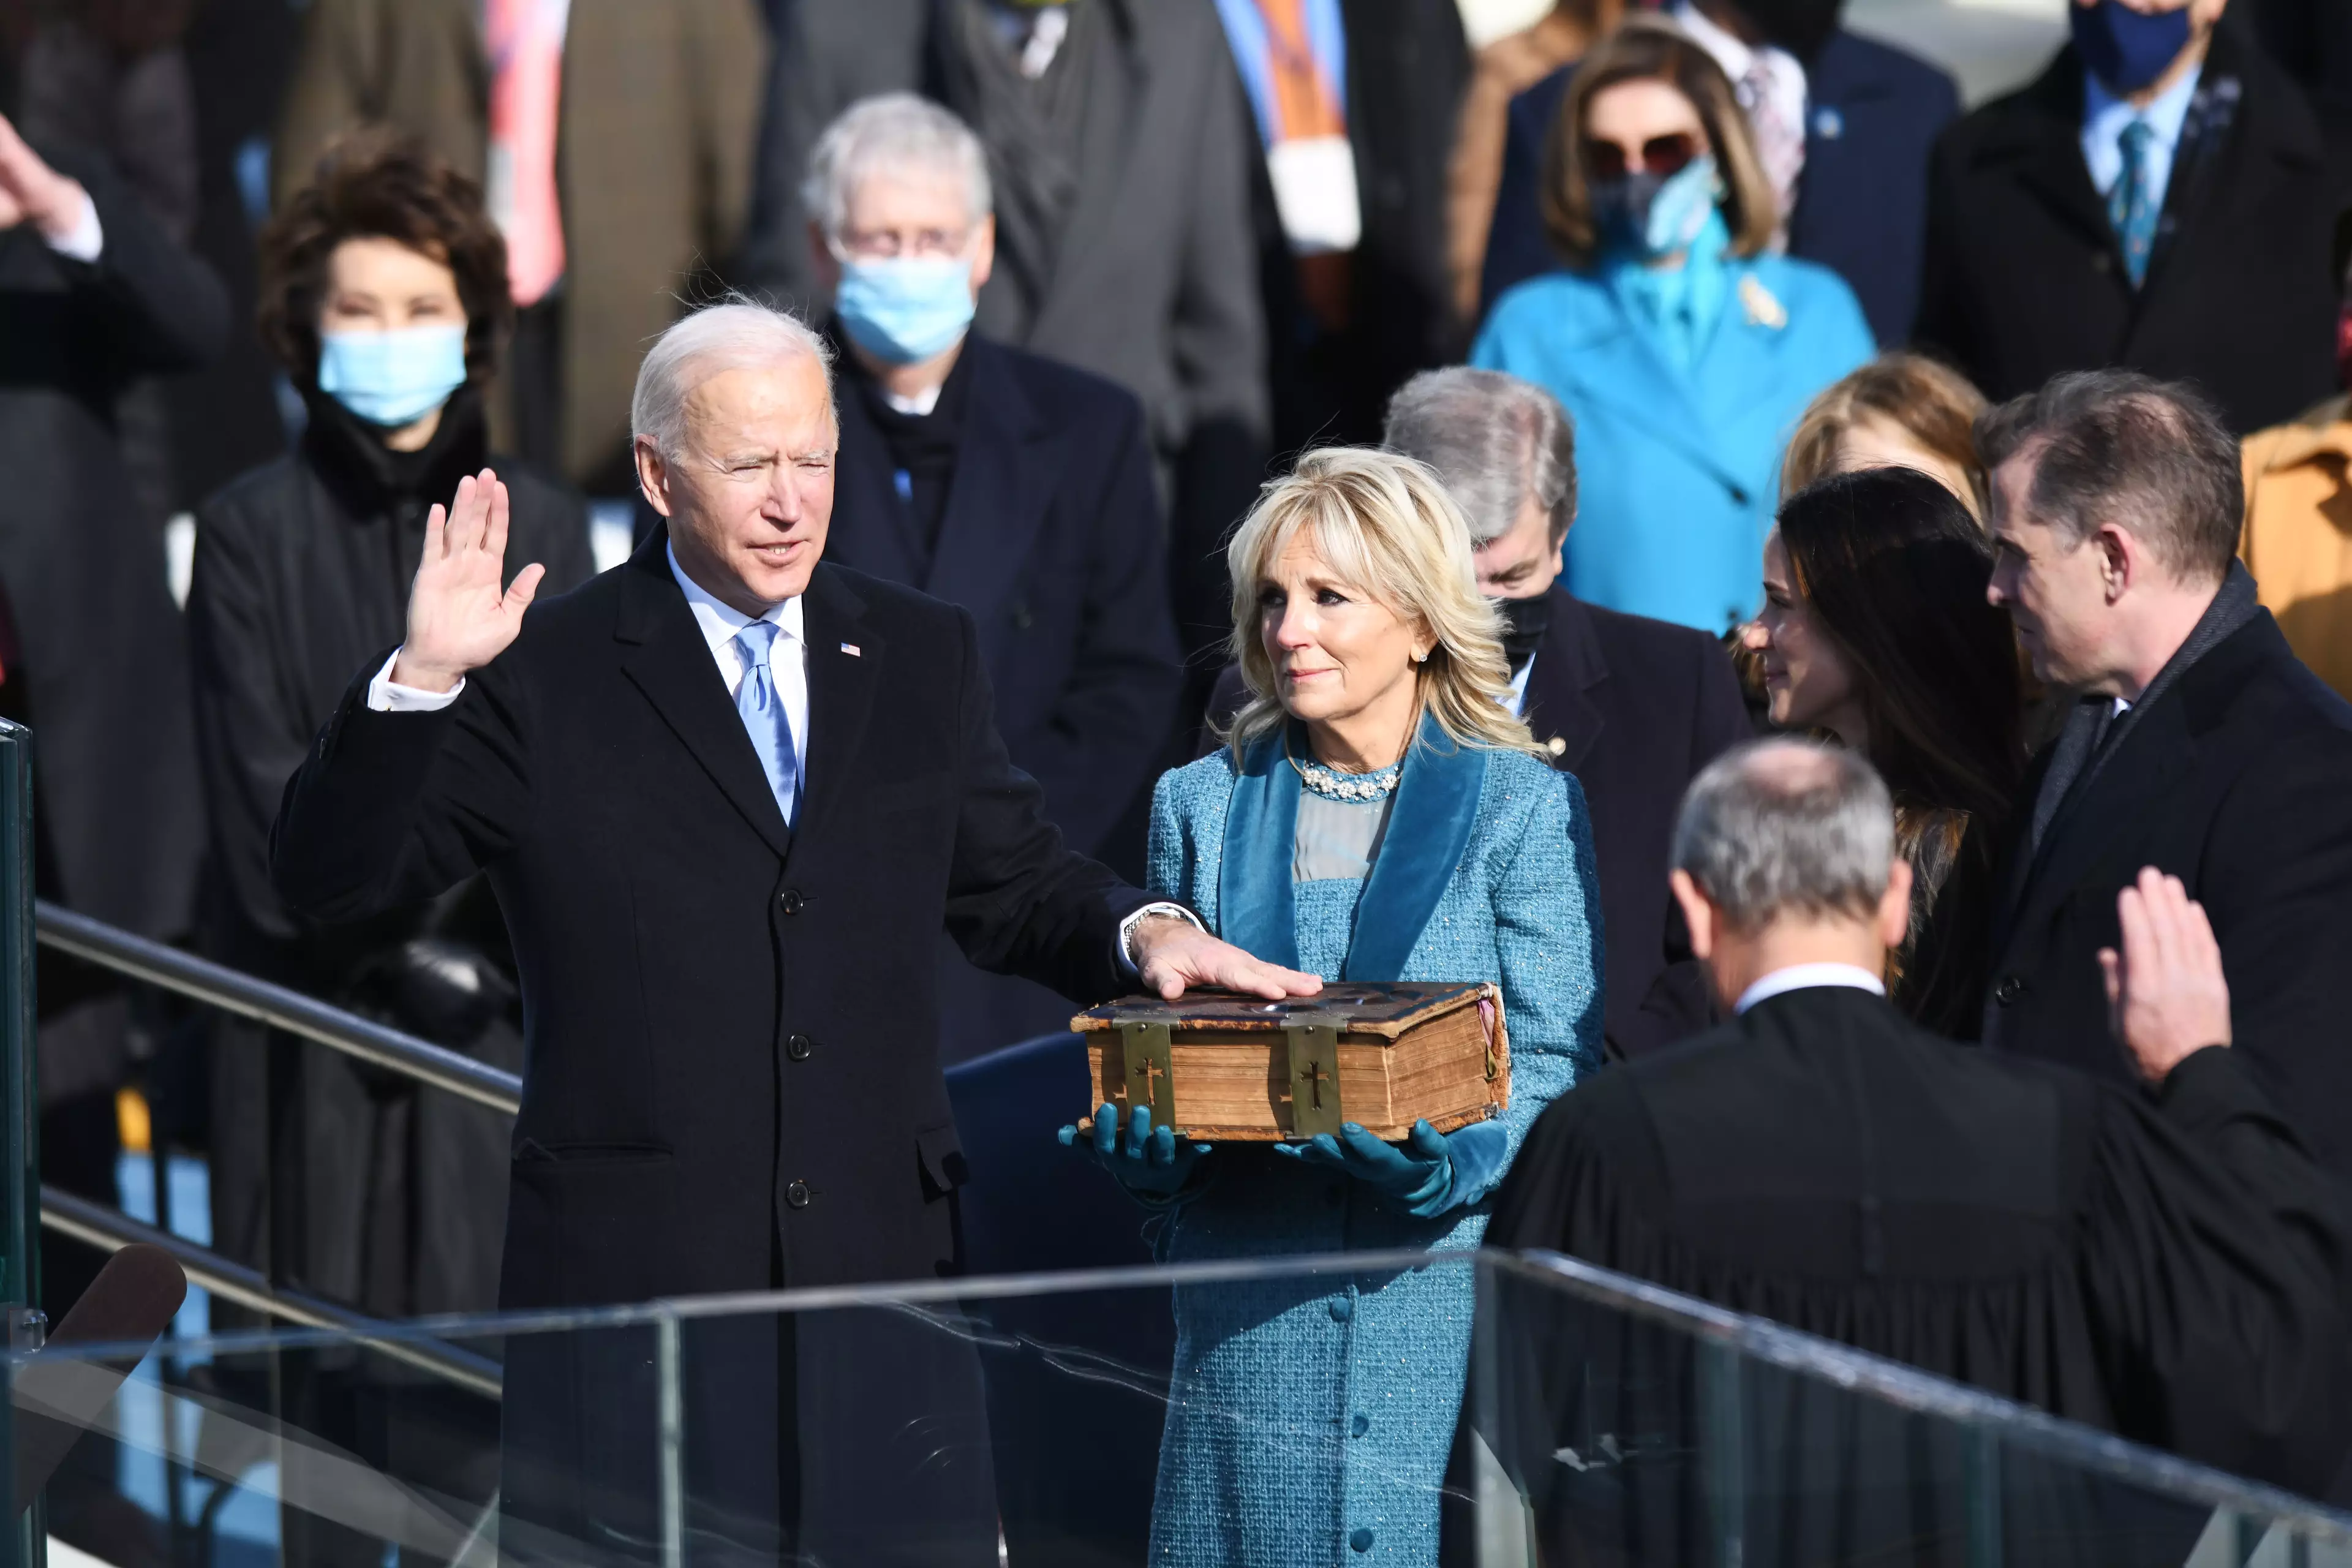 Joe Biden was sworn in as the 46th President of the United States.